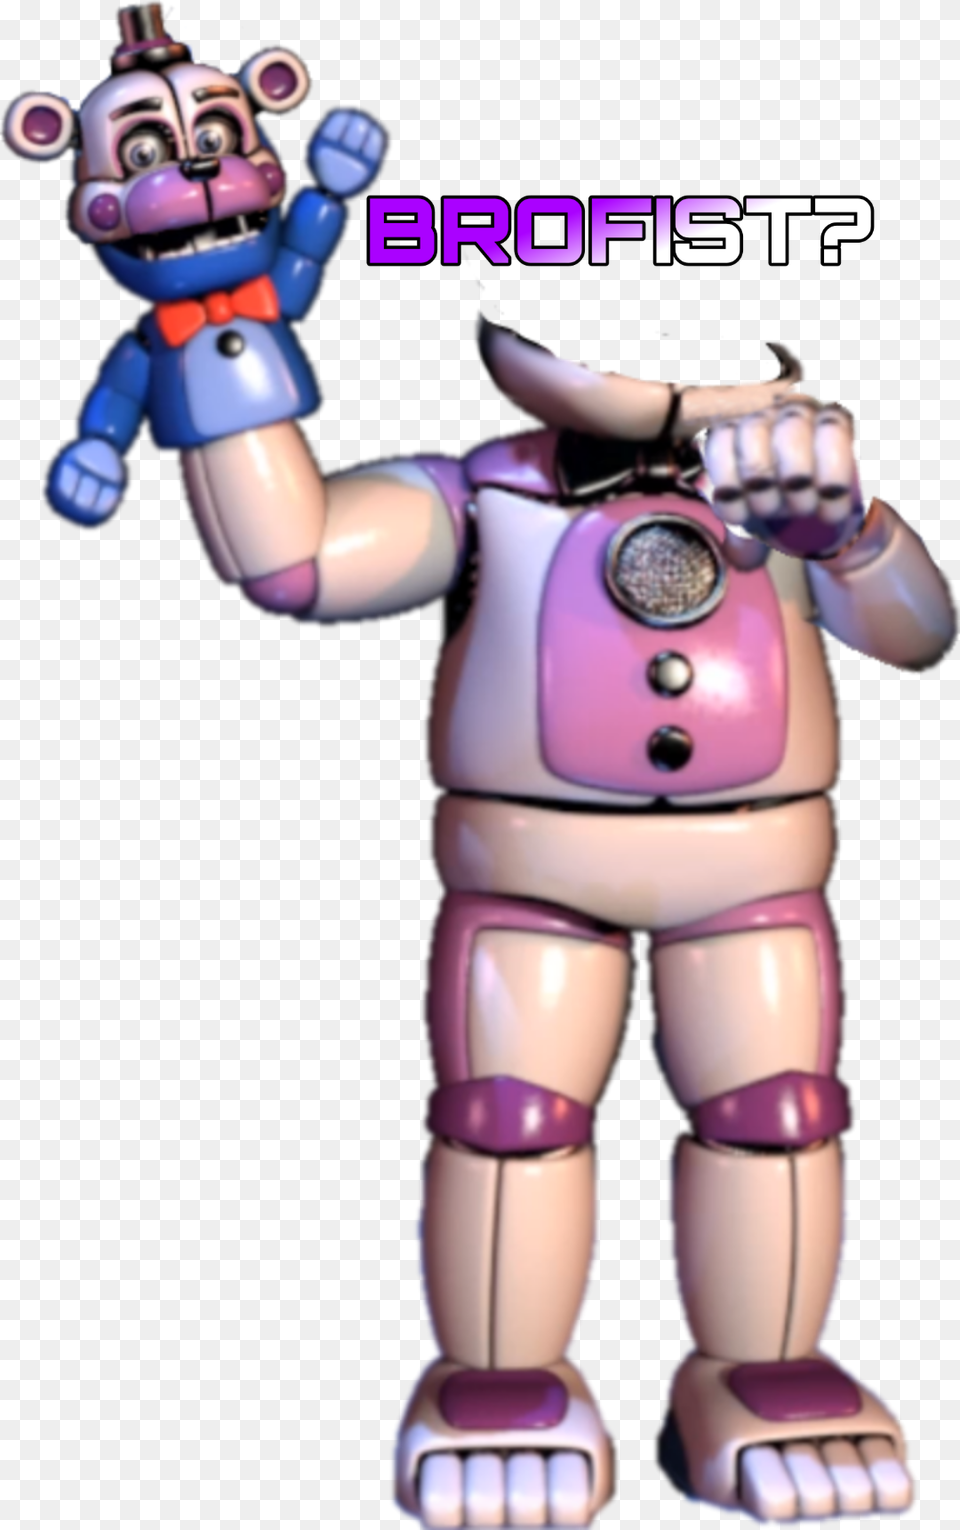 Fnafsisterlocation Pewdiepie Brofist Funtime Freddy Full Body, Robot, Baby, Person Png Image